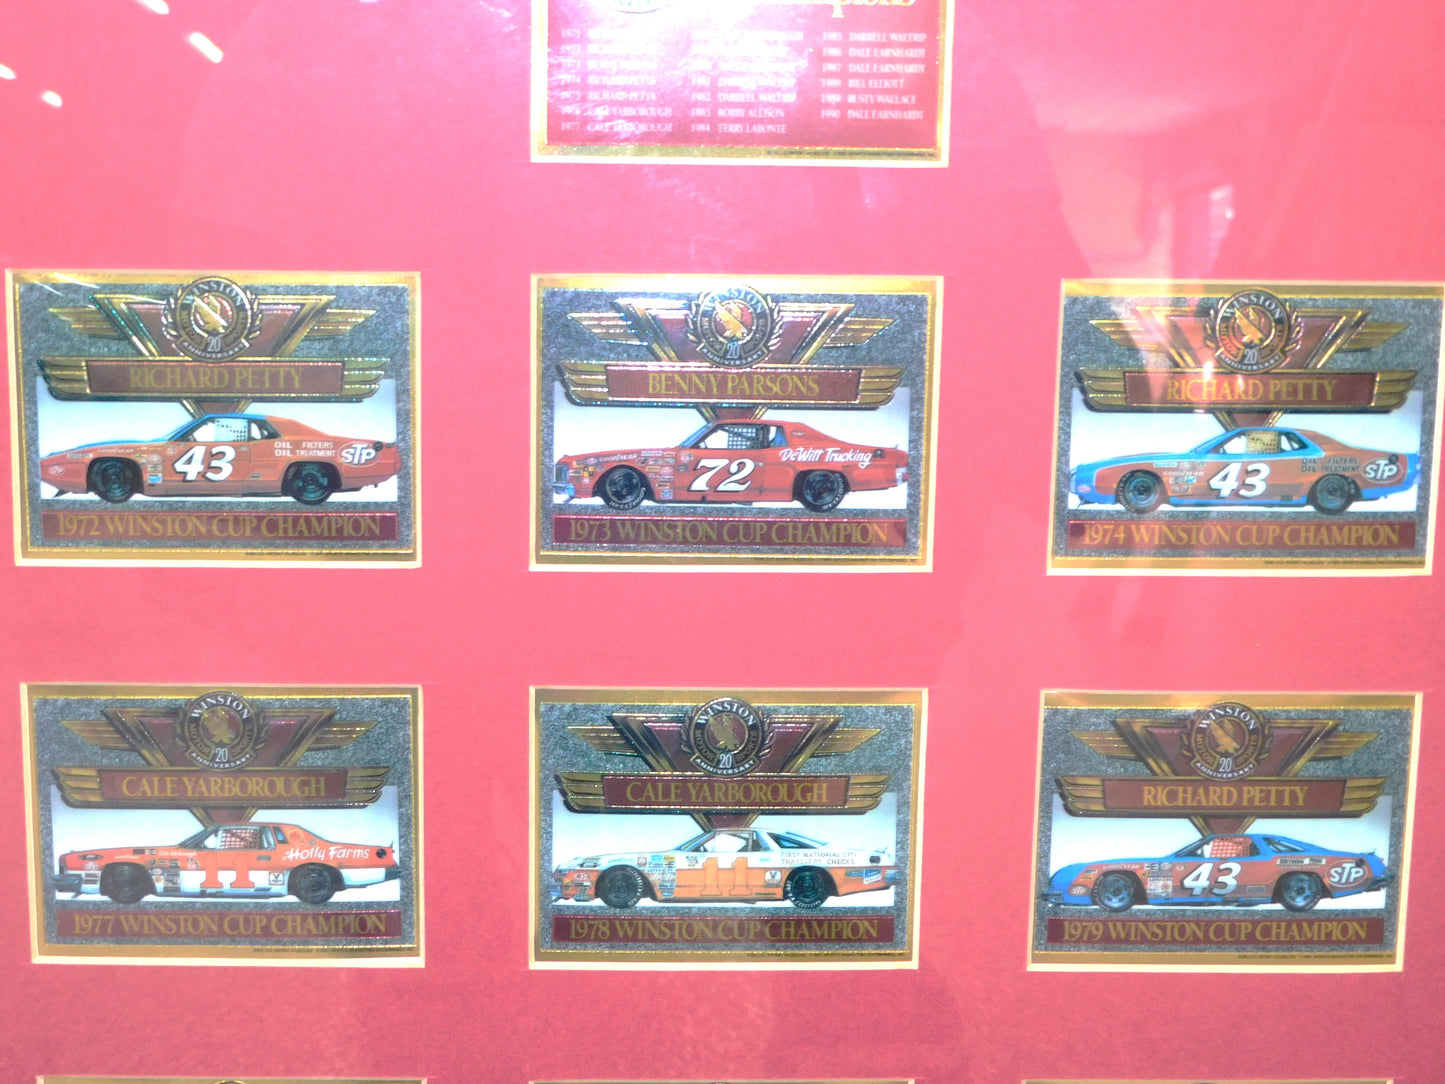 1991 20 Years of Winston Cup Champions